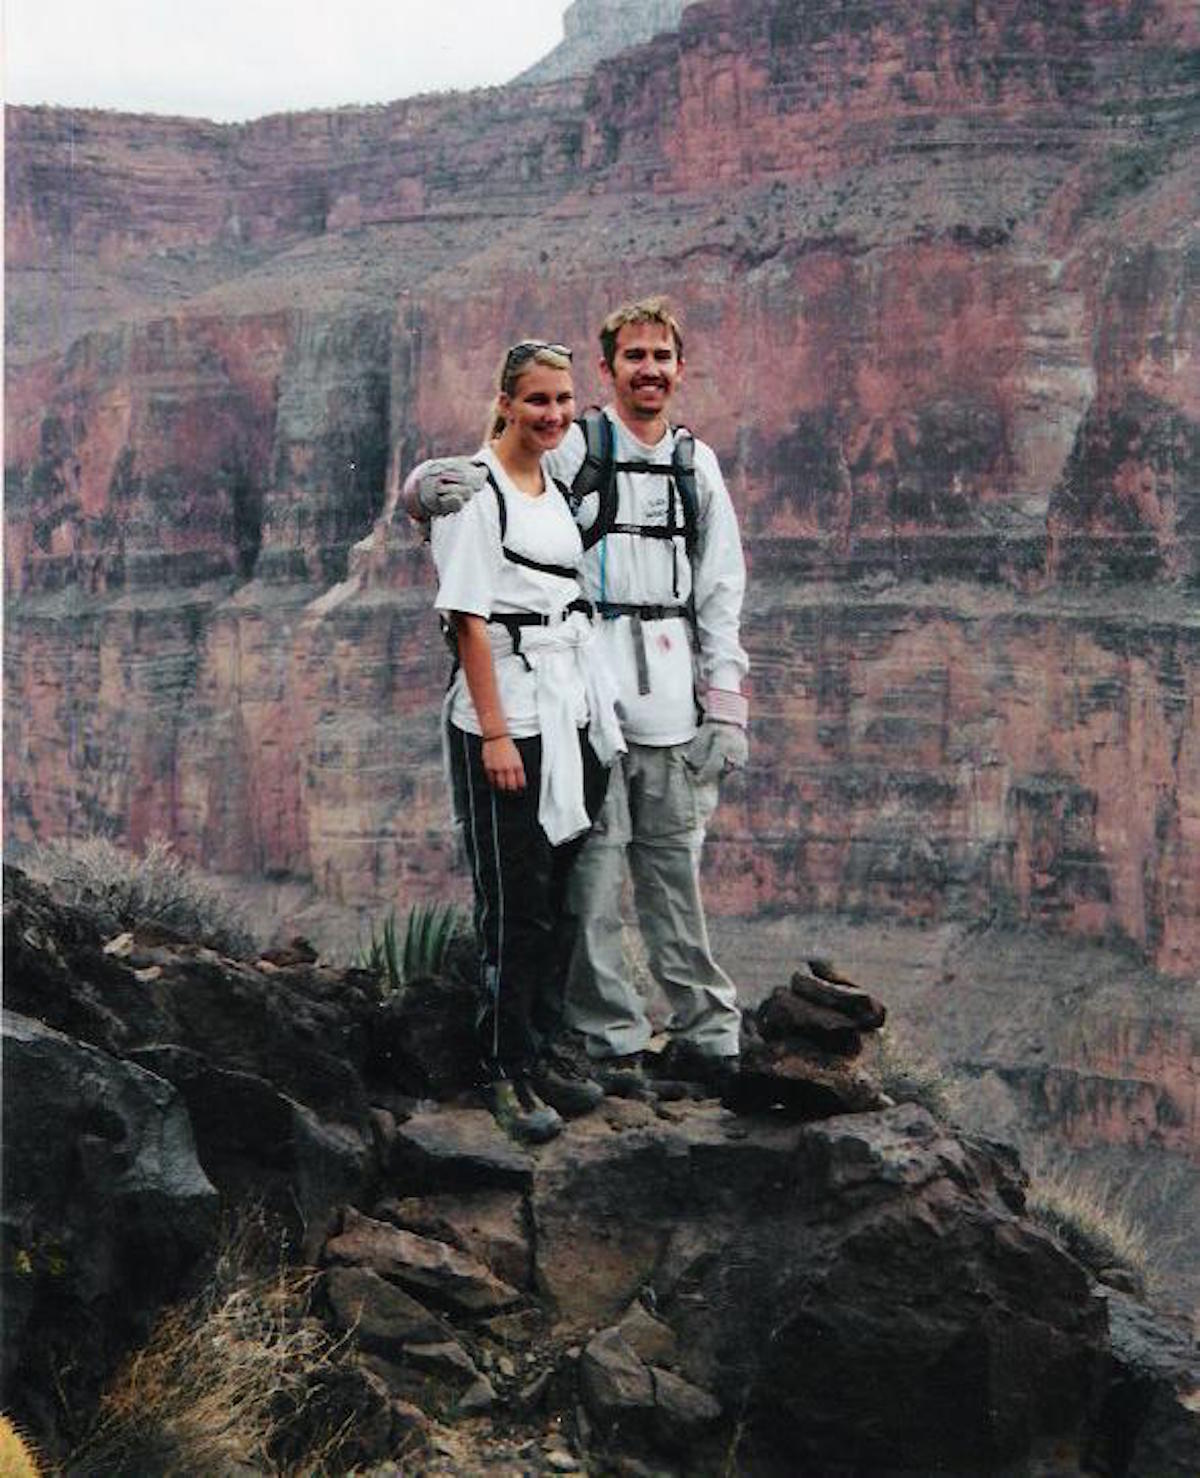 This is Justin and I on our first backpacking trip together in 2002. I think my favorite part of this picture is Justin’s gardening gloves. 